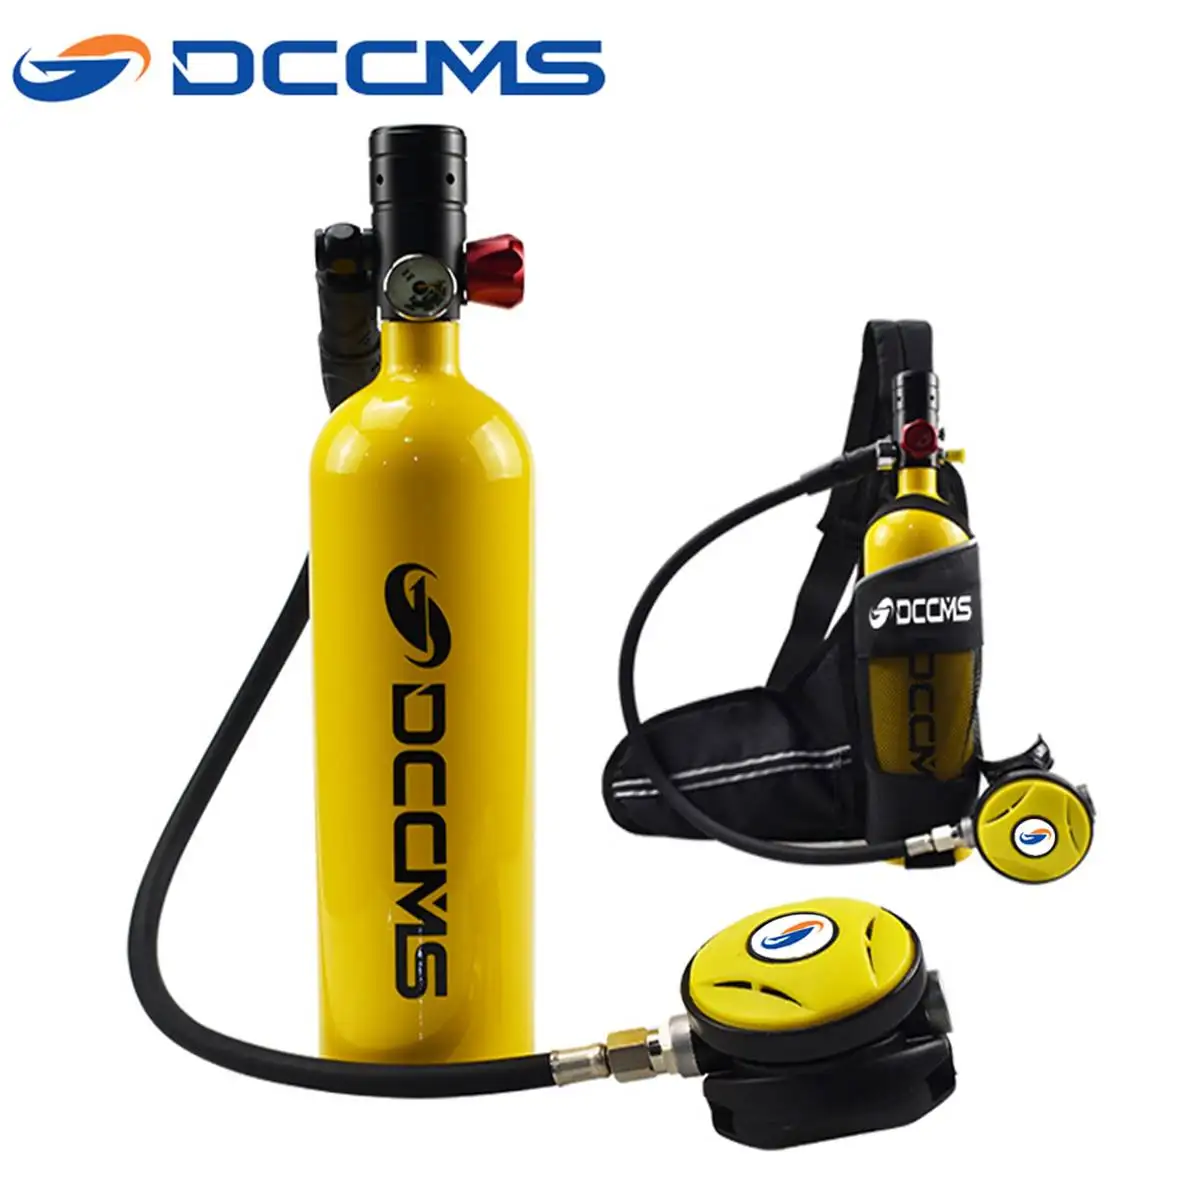 

DCCMS 1L Scuba Diving Air Tank Portable Oxygen Cylinder Respirator Underwater Breathing Equipment Tool Set for Snorkeling Breath